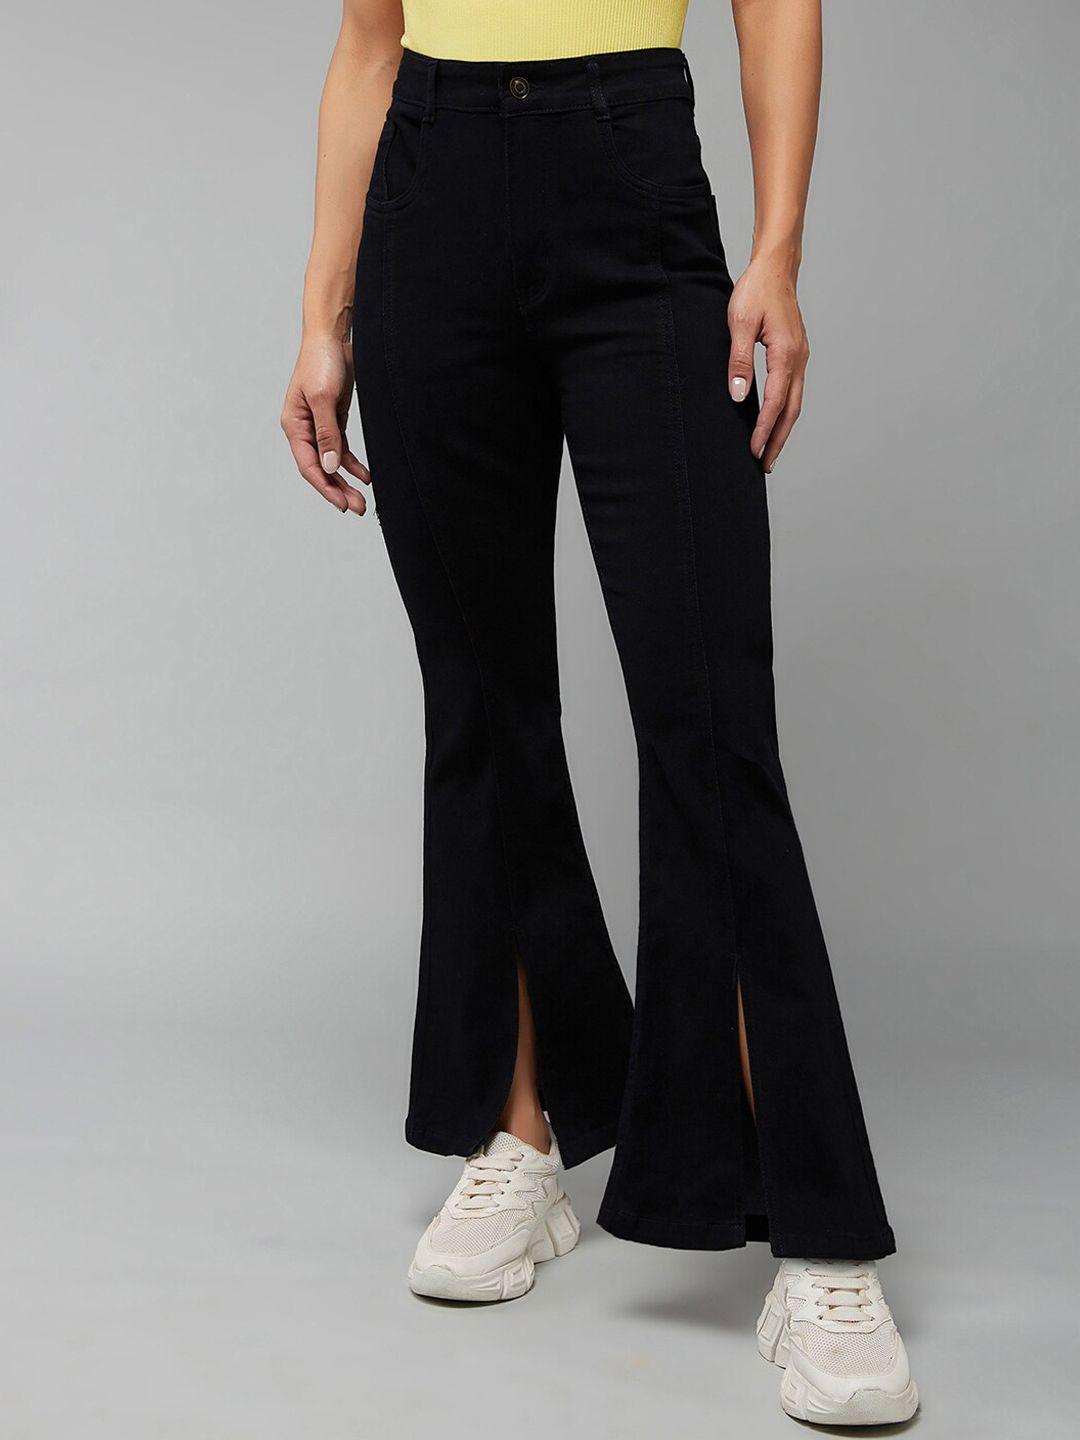 miss-chase-women-black-bootcut-high-rise-stretchable-jeans